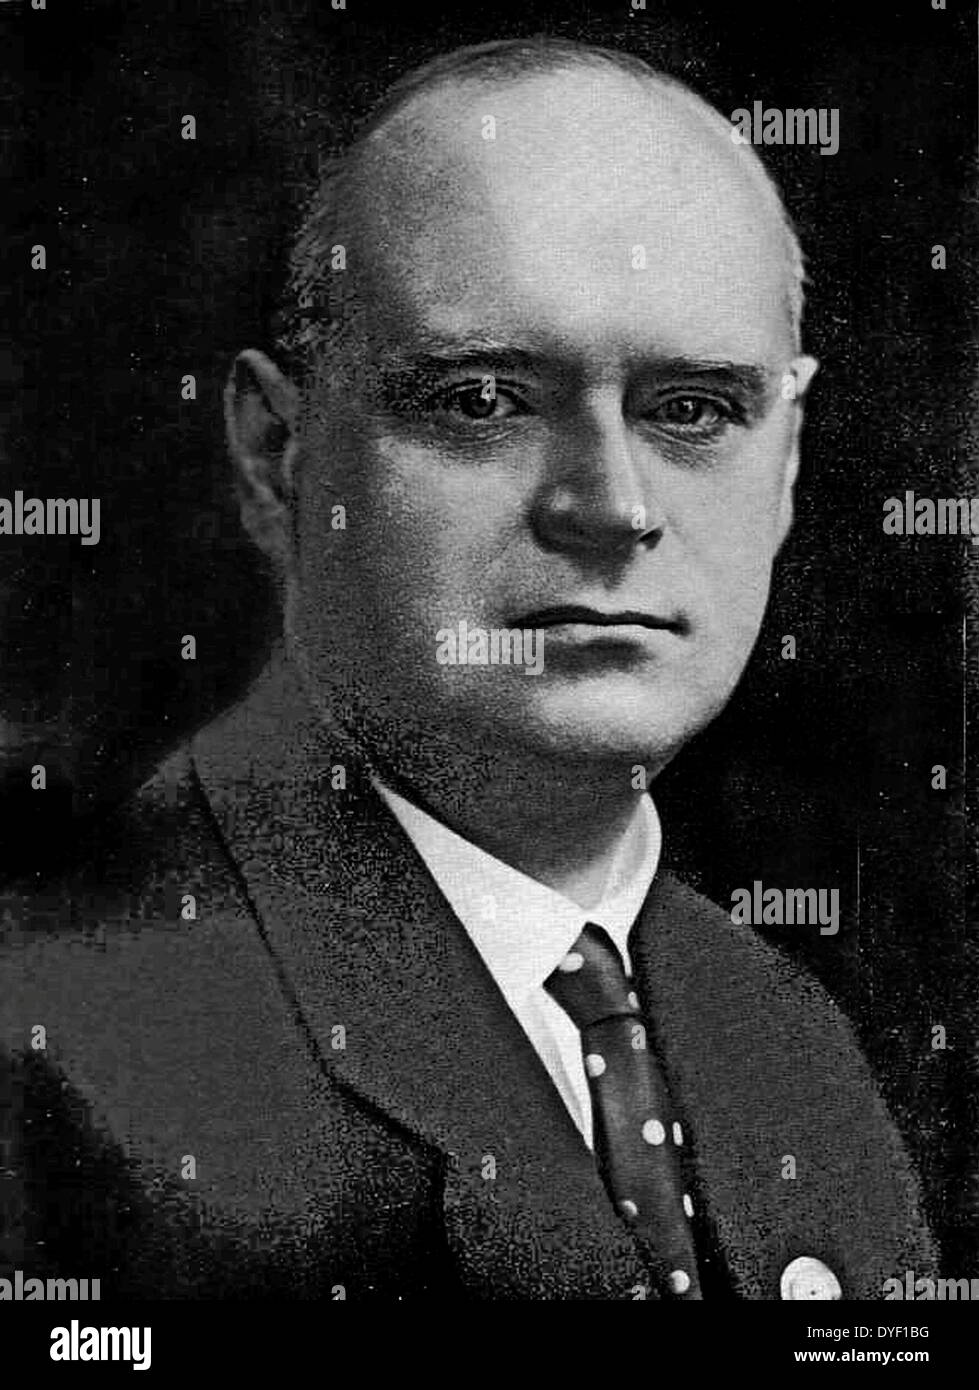 Photographic portrait of Carl Röver, Gauleiter of Weser-Ems from 1928 to his death in 1942. Stock Photo